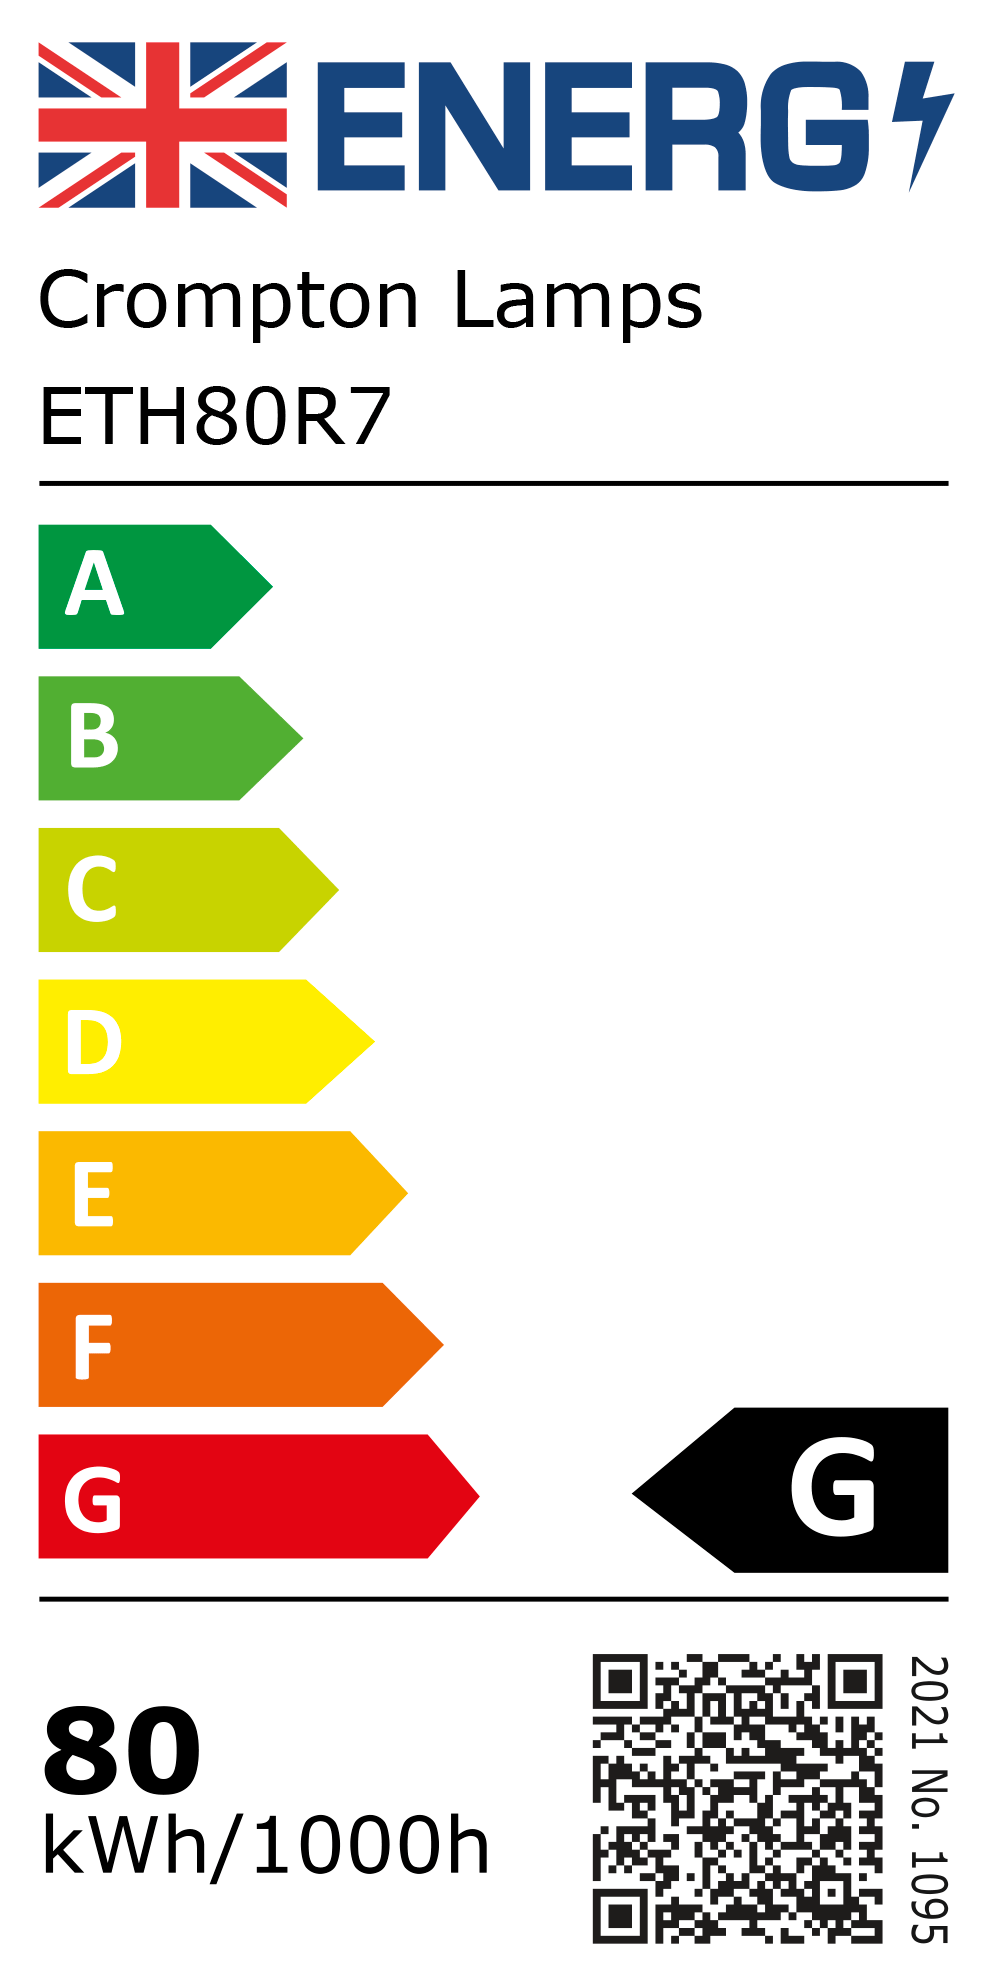 New 2021 Energy Rating Label: Stock Code ETH80R7